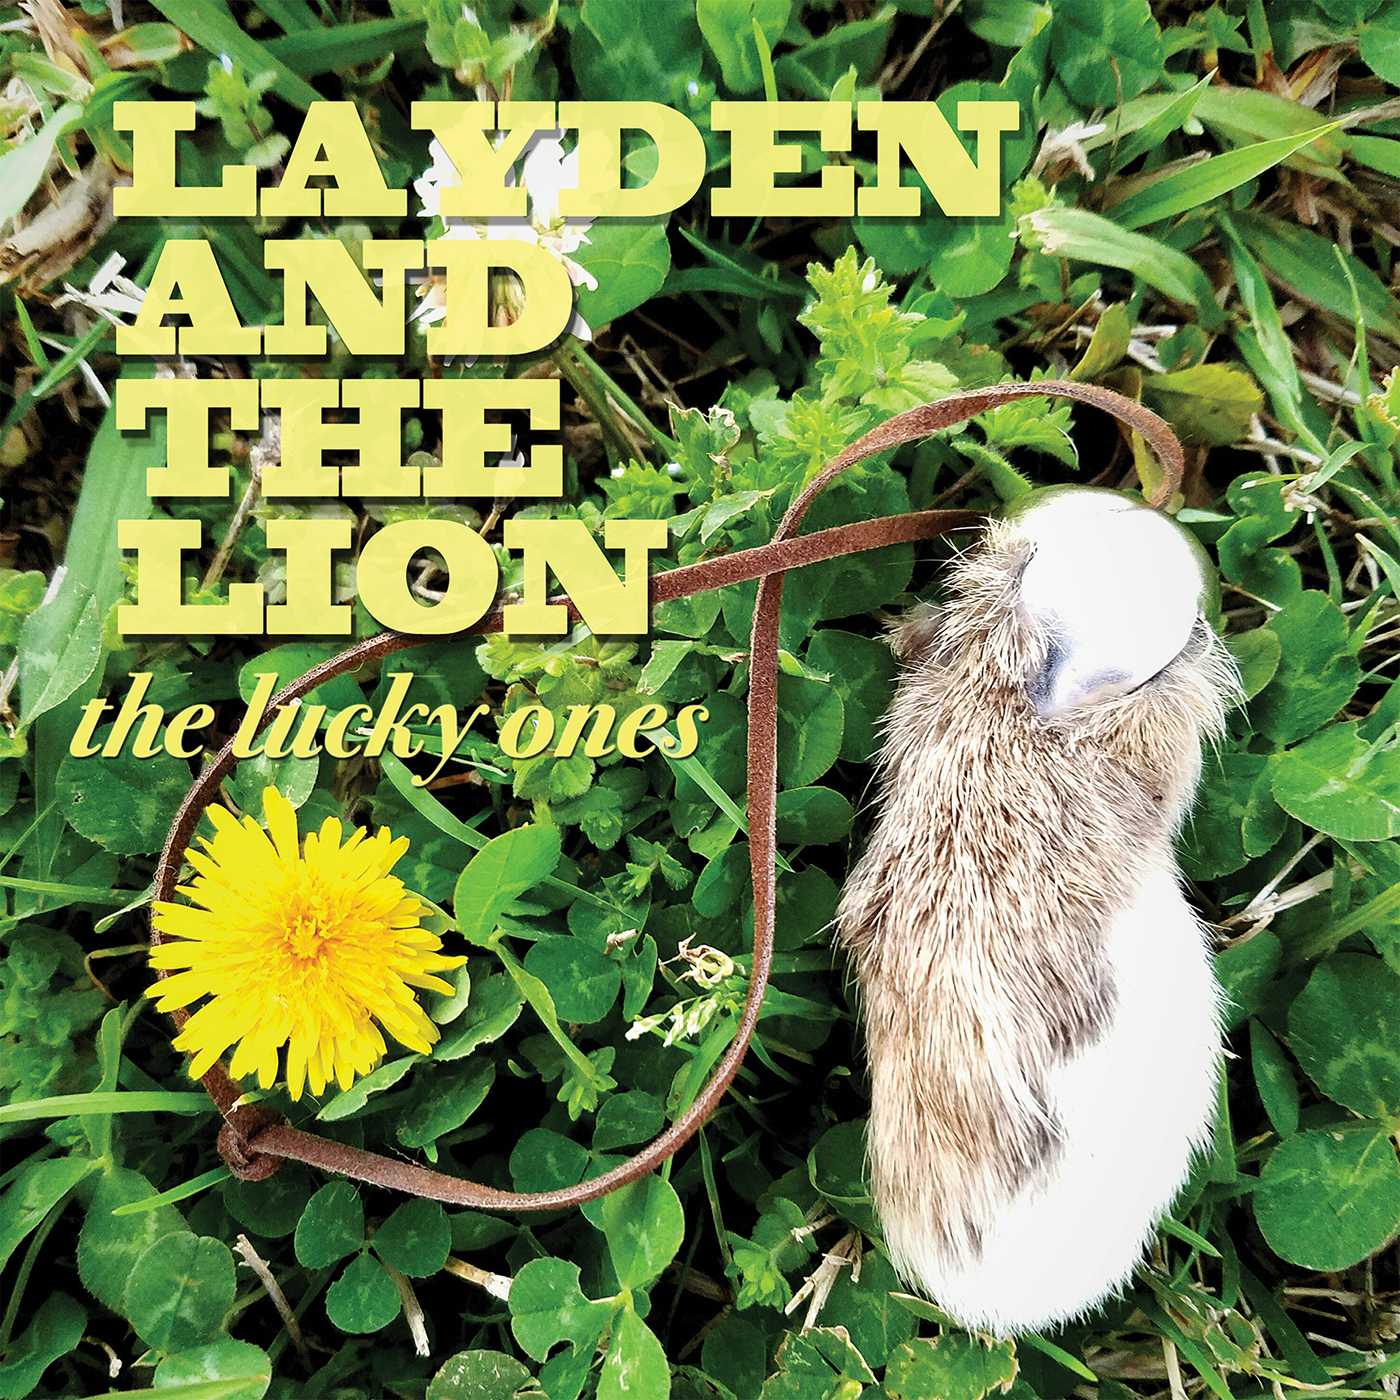 The Lucky Ones - Layden & The Lion